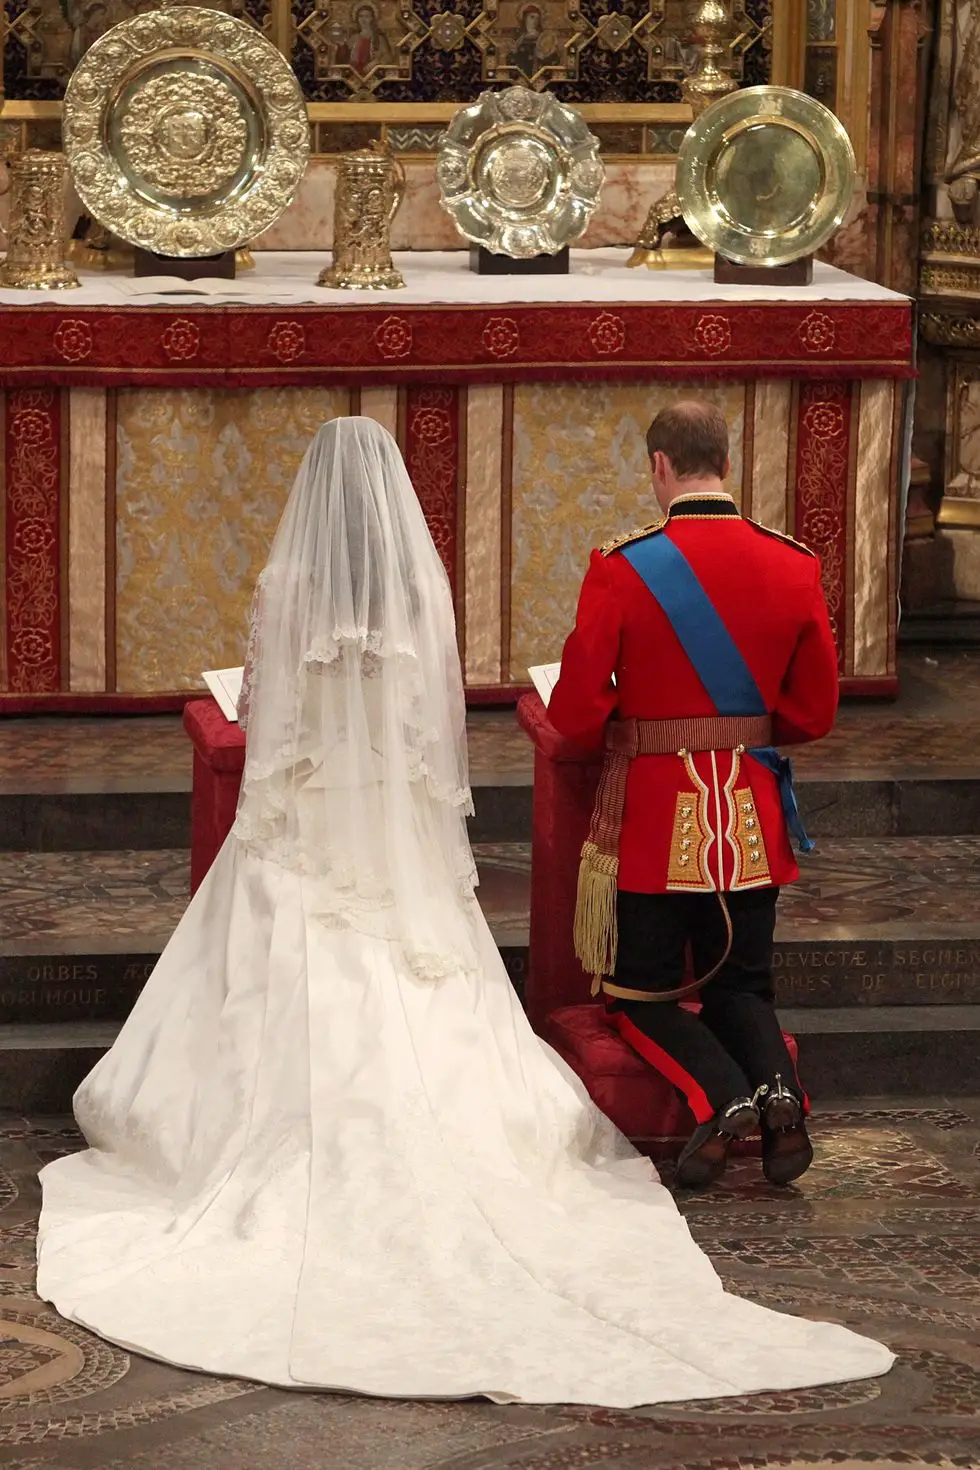 Prince William and Kate Middleton kneeling at the Westminster Abbey on their wedding day